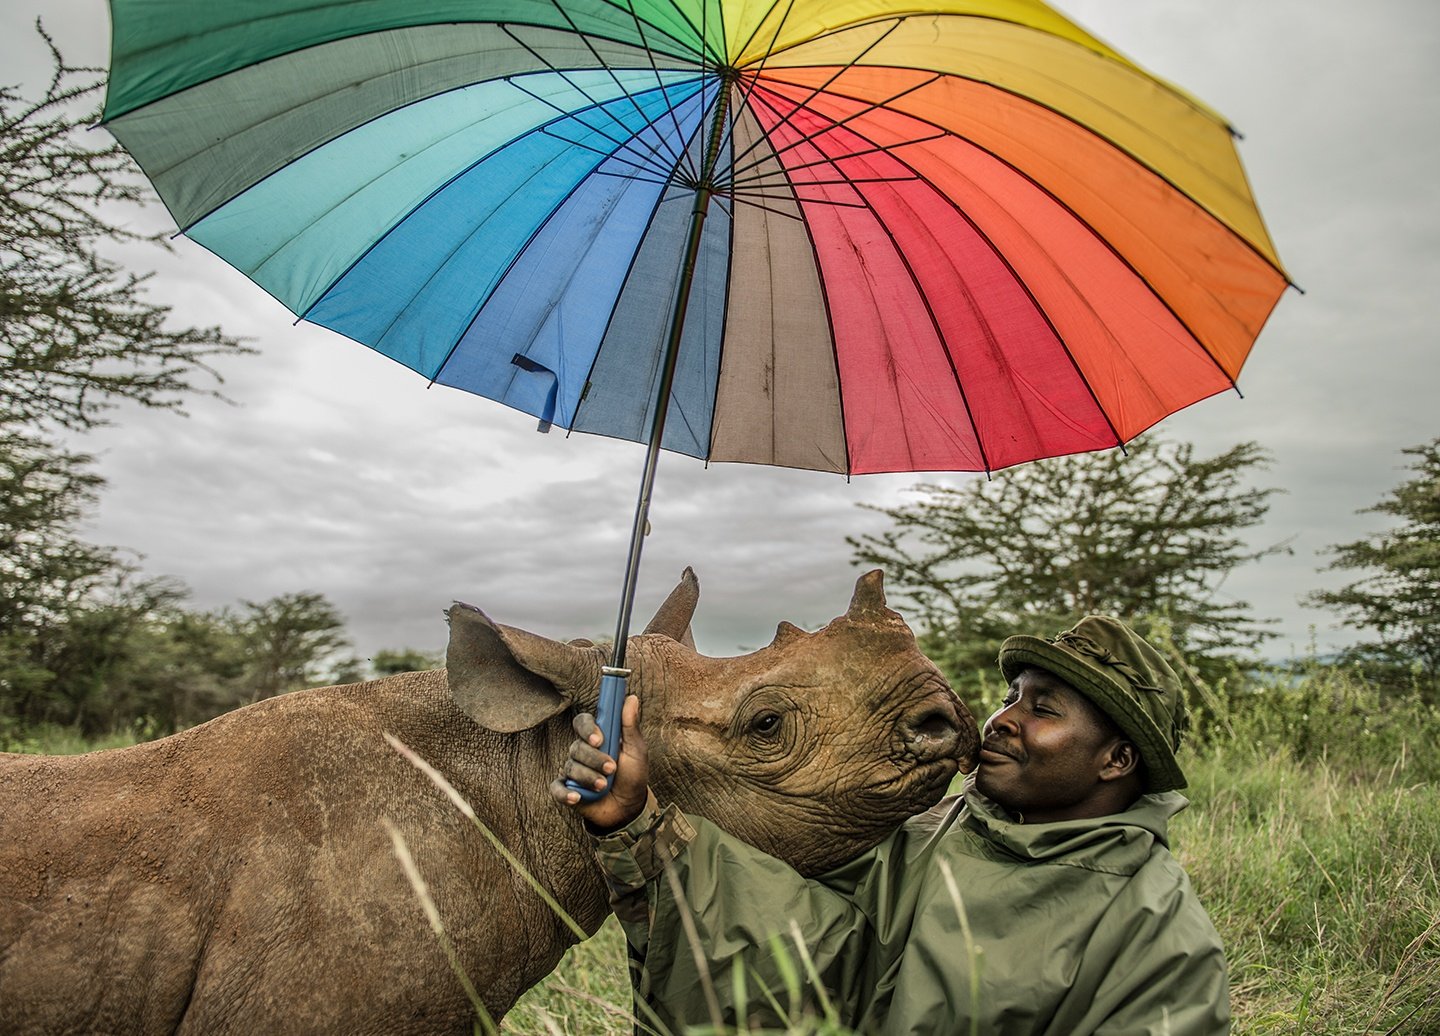 Kamara is nuzzled by a black rhino named Kilifi, who he hand-raised along with two other baby rhinos at Lewa Wildlife Conservancy in Kenya.